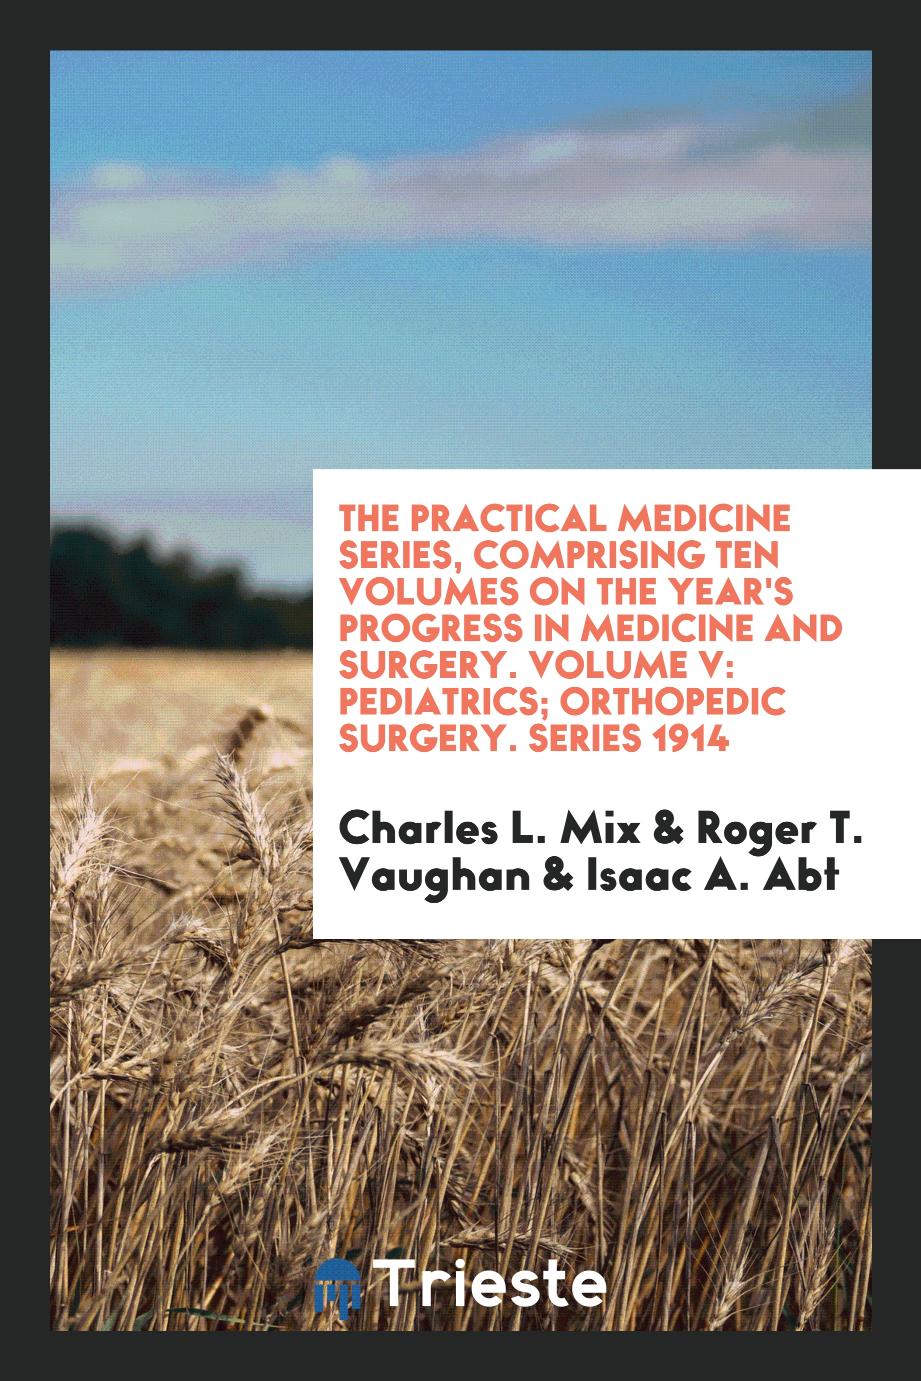 The Practical Medicine Series, Comprising Ten Volumes on the Year's Progress in Medicine and Surgery. Volume V: Pediatrics; Orthopedic Surgery. Series 1914